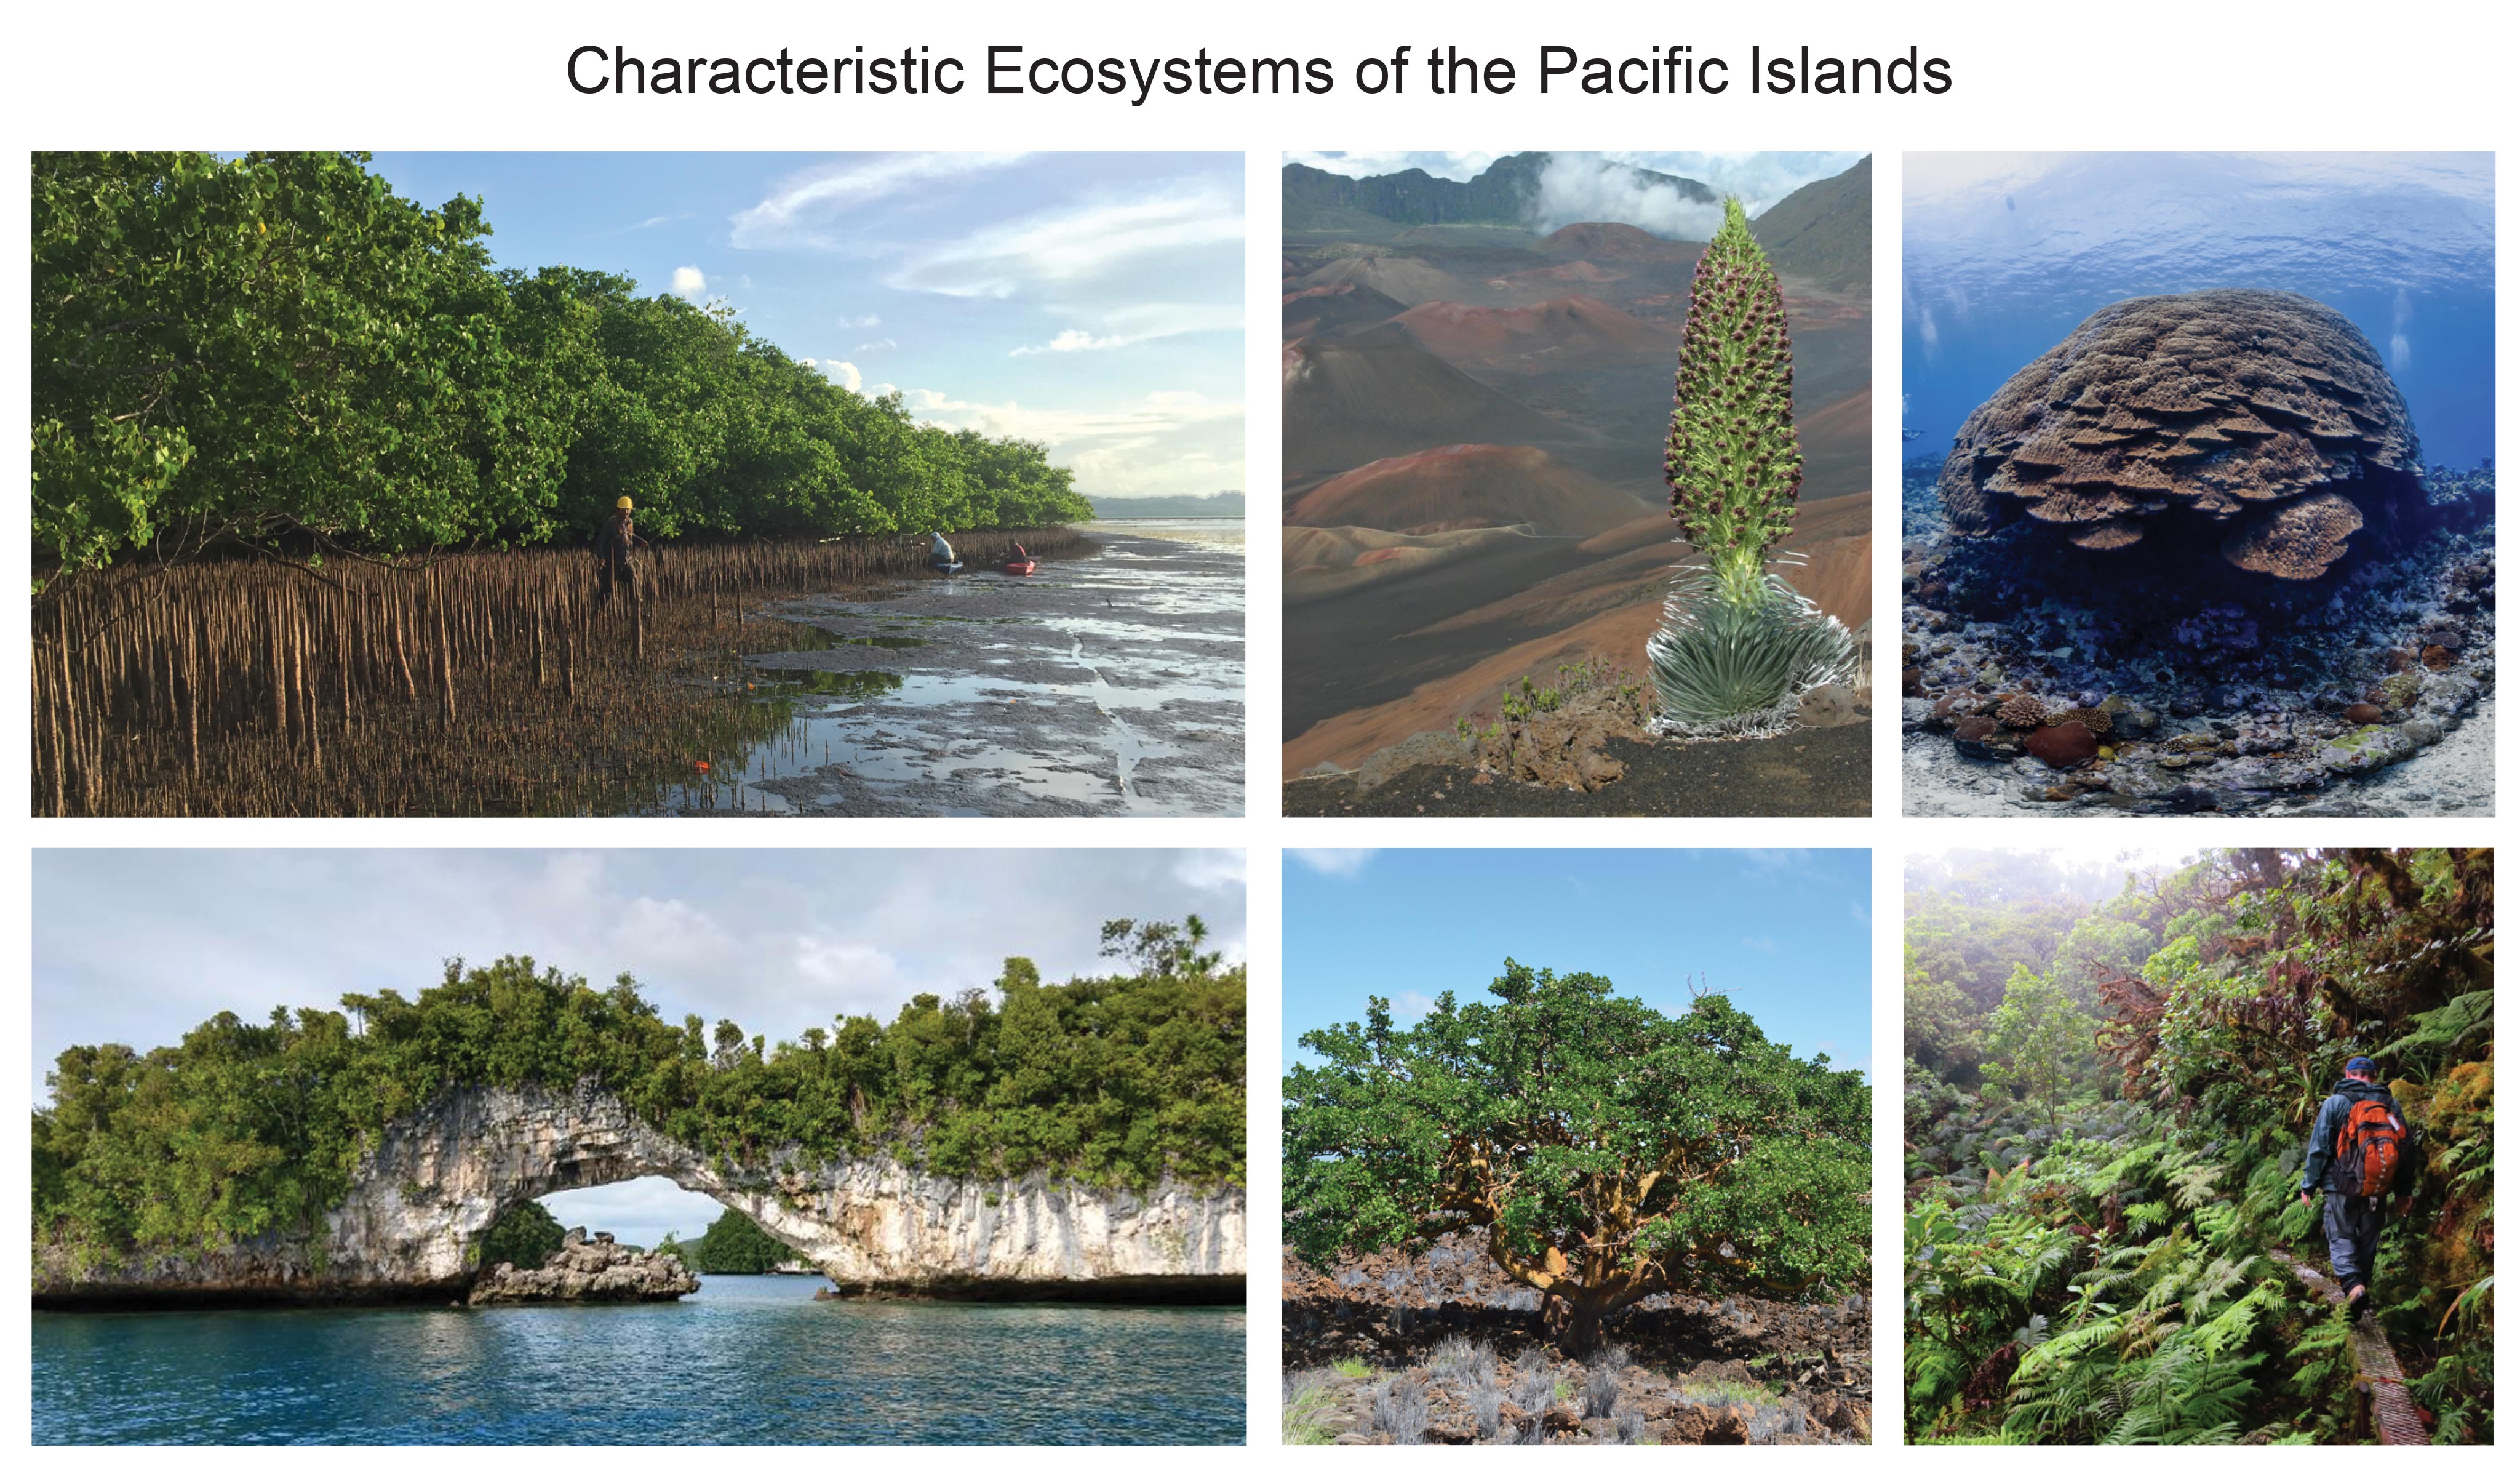 Characteristic Ecosystems of the Pacific Islands